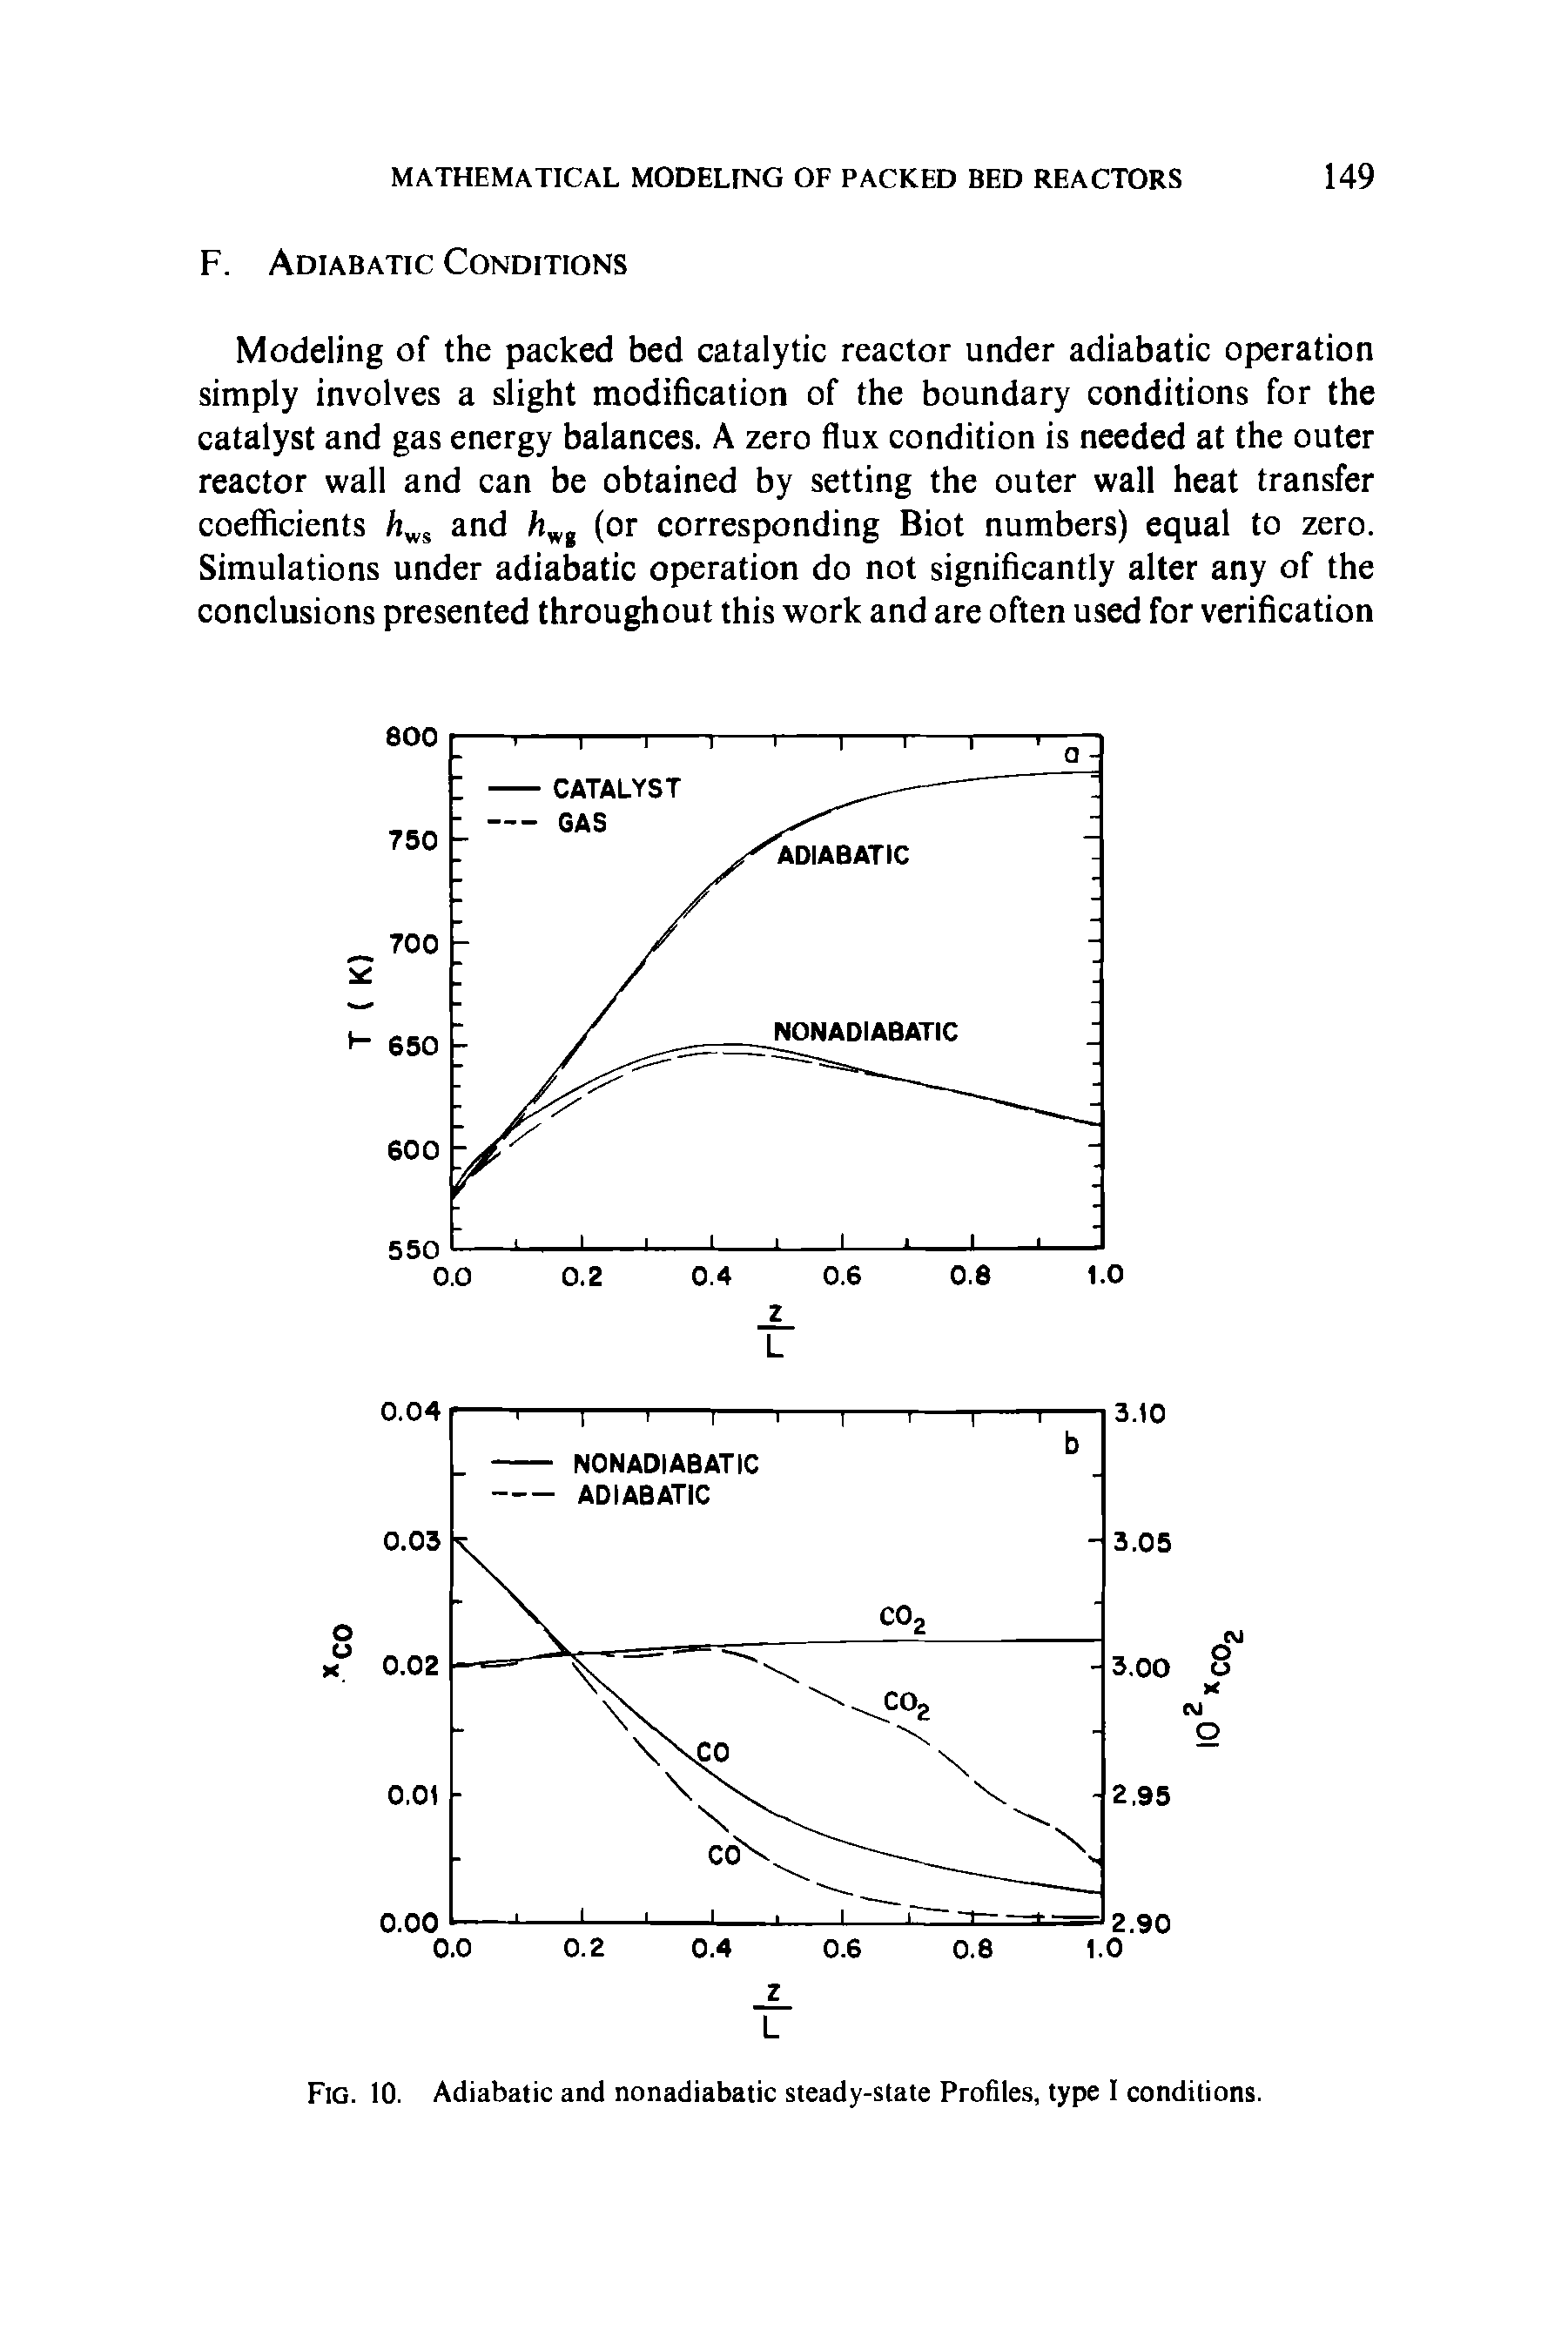 Fig. 10. Adiabatic and nonadiabatic steady-state Profiles, type I conditions.